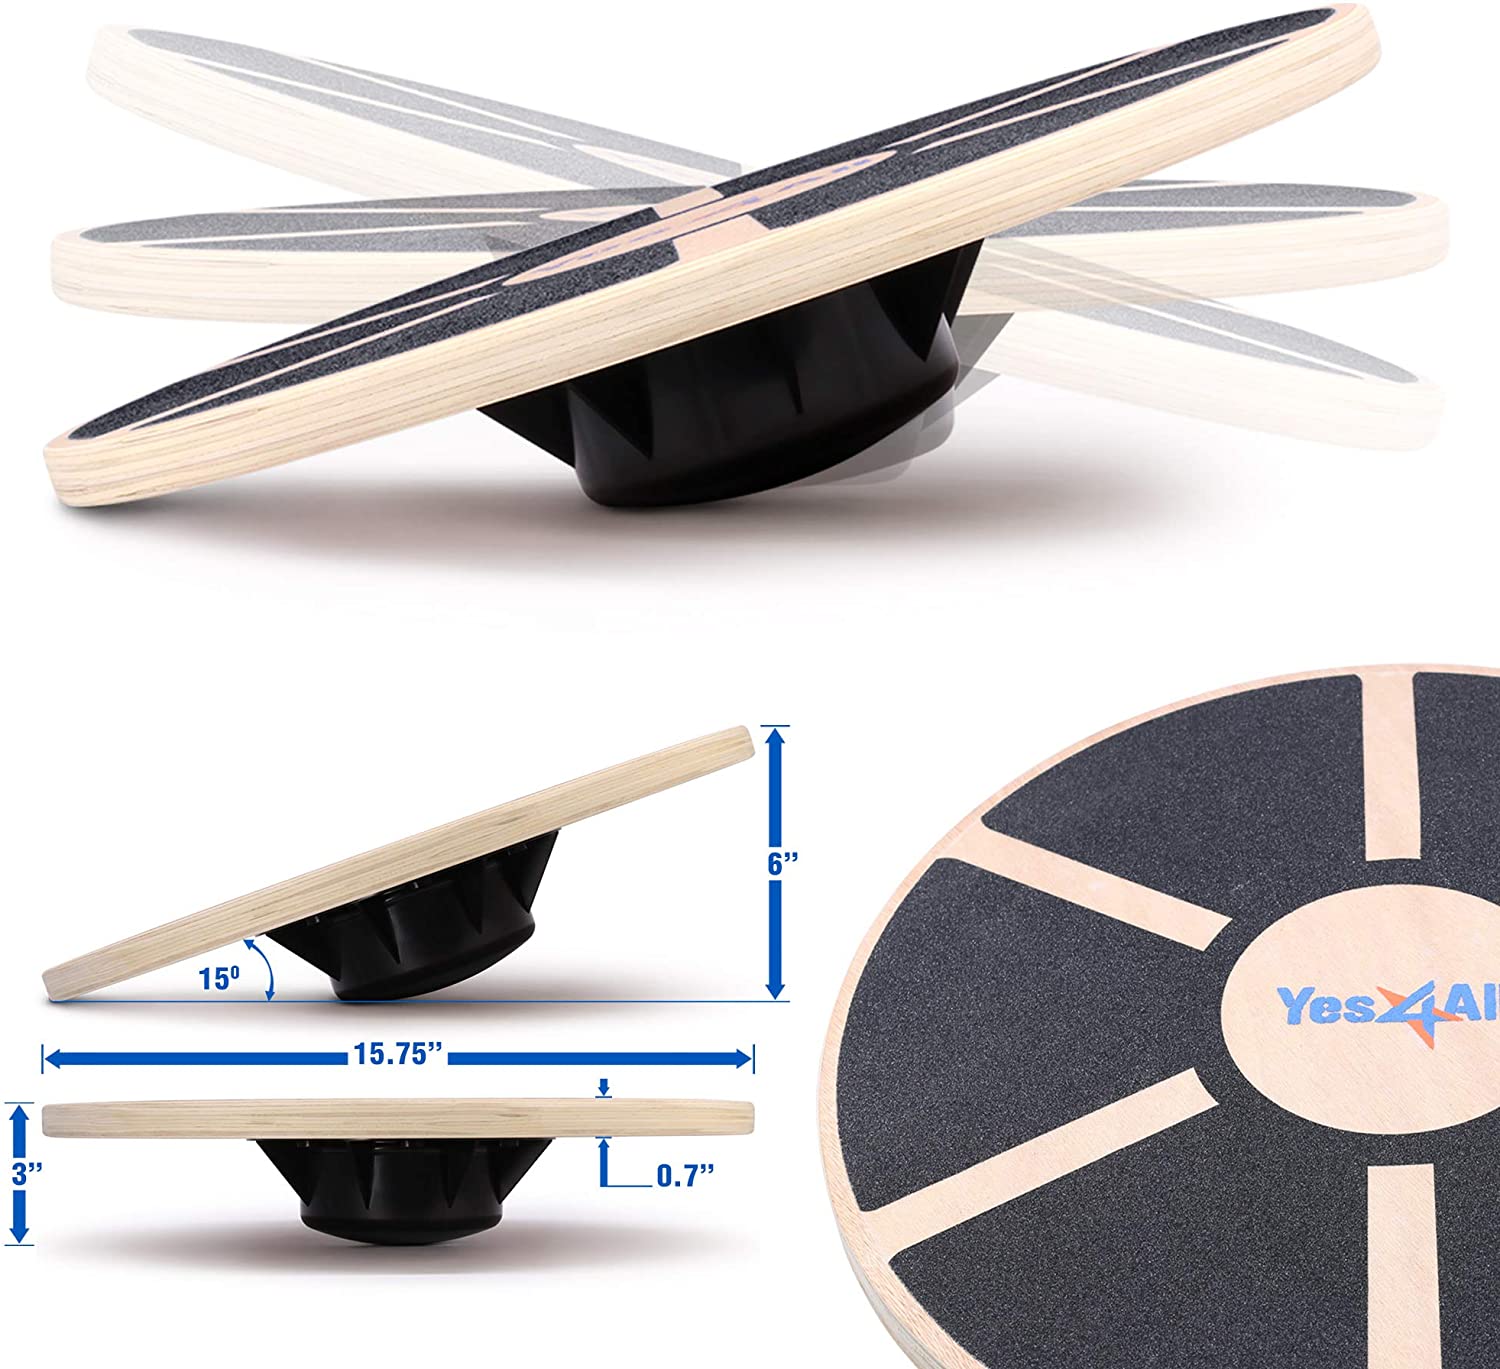 Yes4All Versatile Wooden Wobble Balance Trainer Board with 360 Degree Rotation, Balance Board for Standing Desk, Core Training, Exercise Balance Stability Trainer 15.75 inch - image 3 of 8